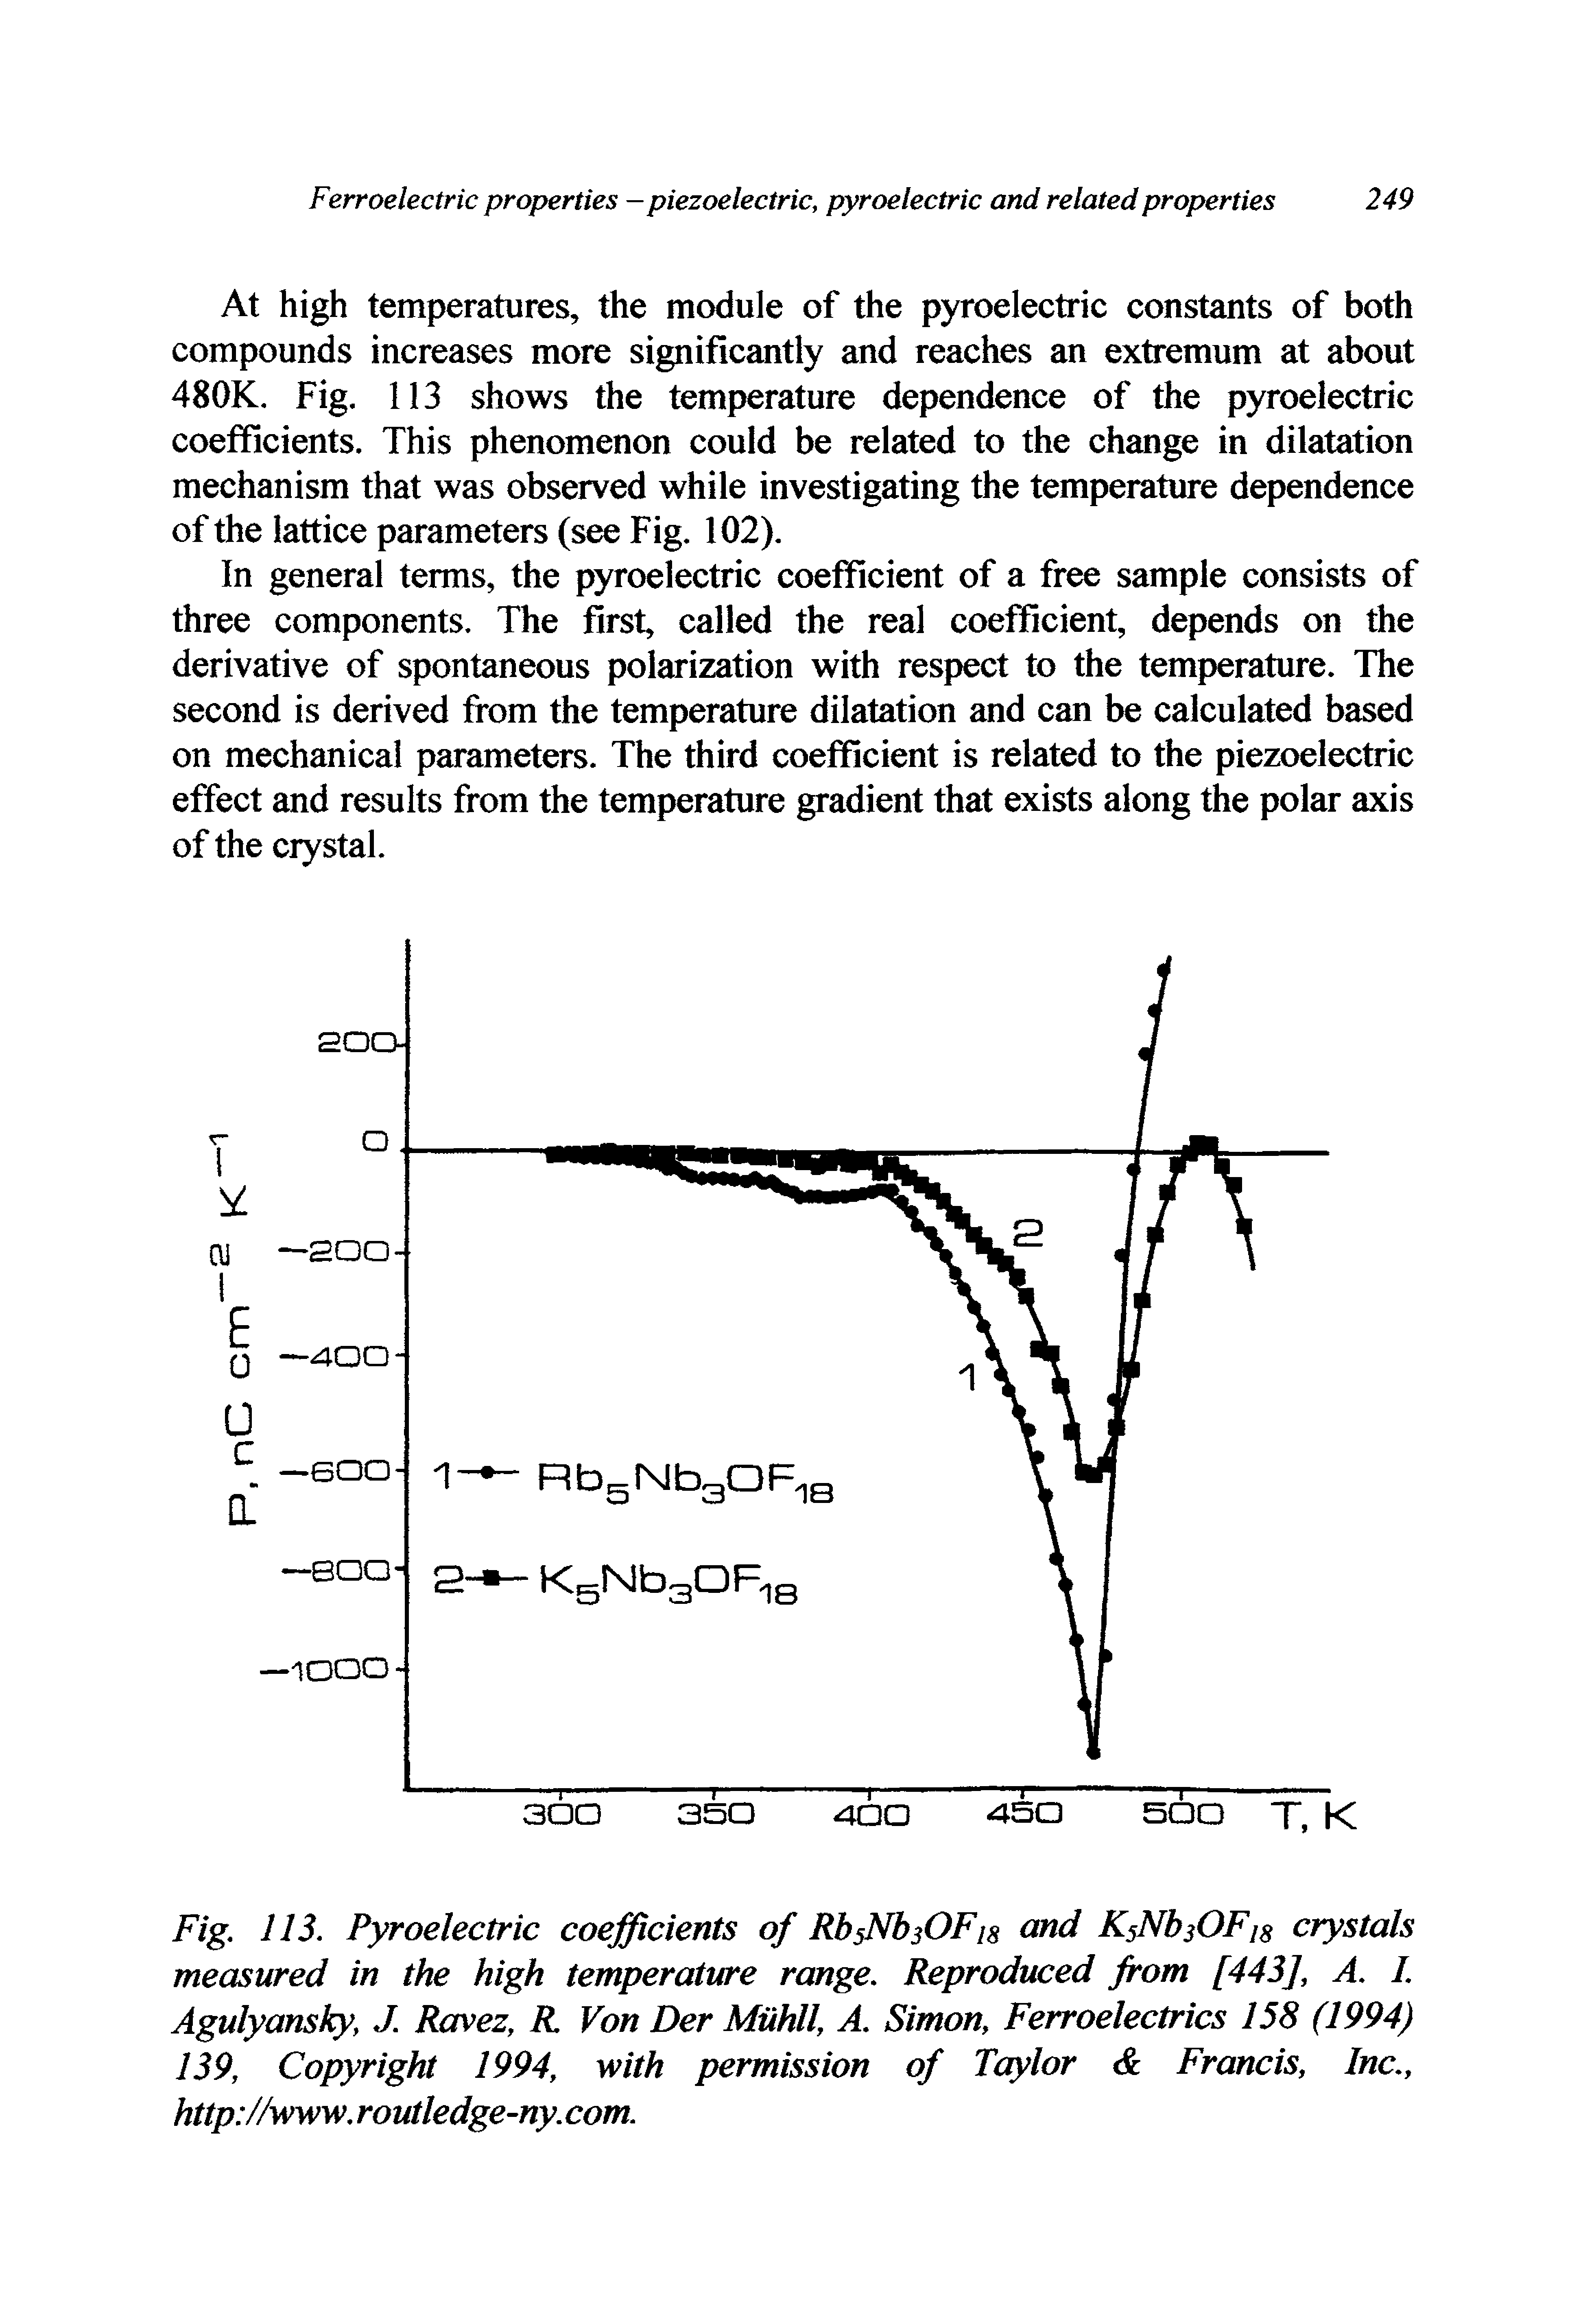 Fig. 113. Pyroelectric coefficients of RbsNbjOFig and KsNbsOFis crystals measured in the high temperature range. Reproduced from [443], A. I. Agulyansky, J. Ravez, R Von Der Miihll, A. Simon, Ferroelectrics 158 (1994) 139, Copyright 1994, with permission of Taylor Francis, Inc., http //www. routledge-ny.com.